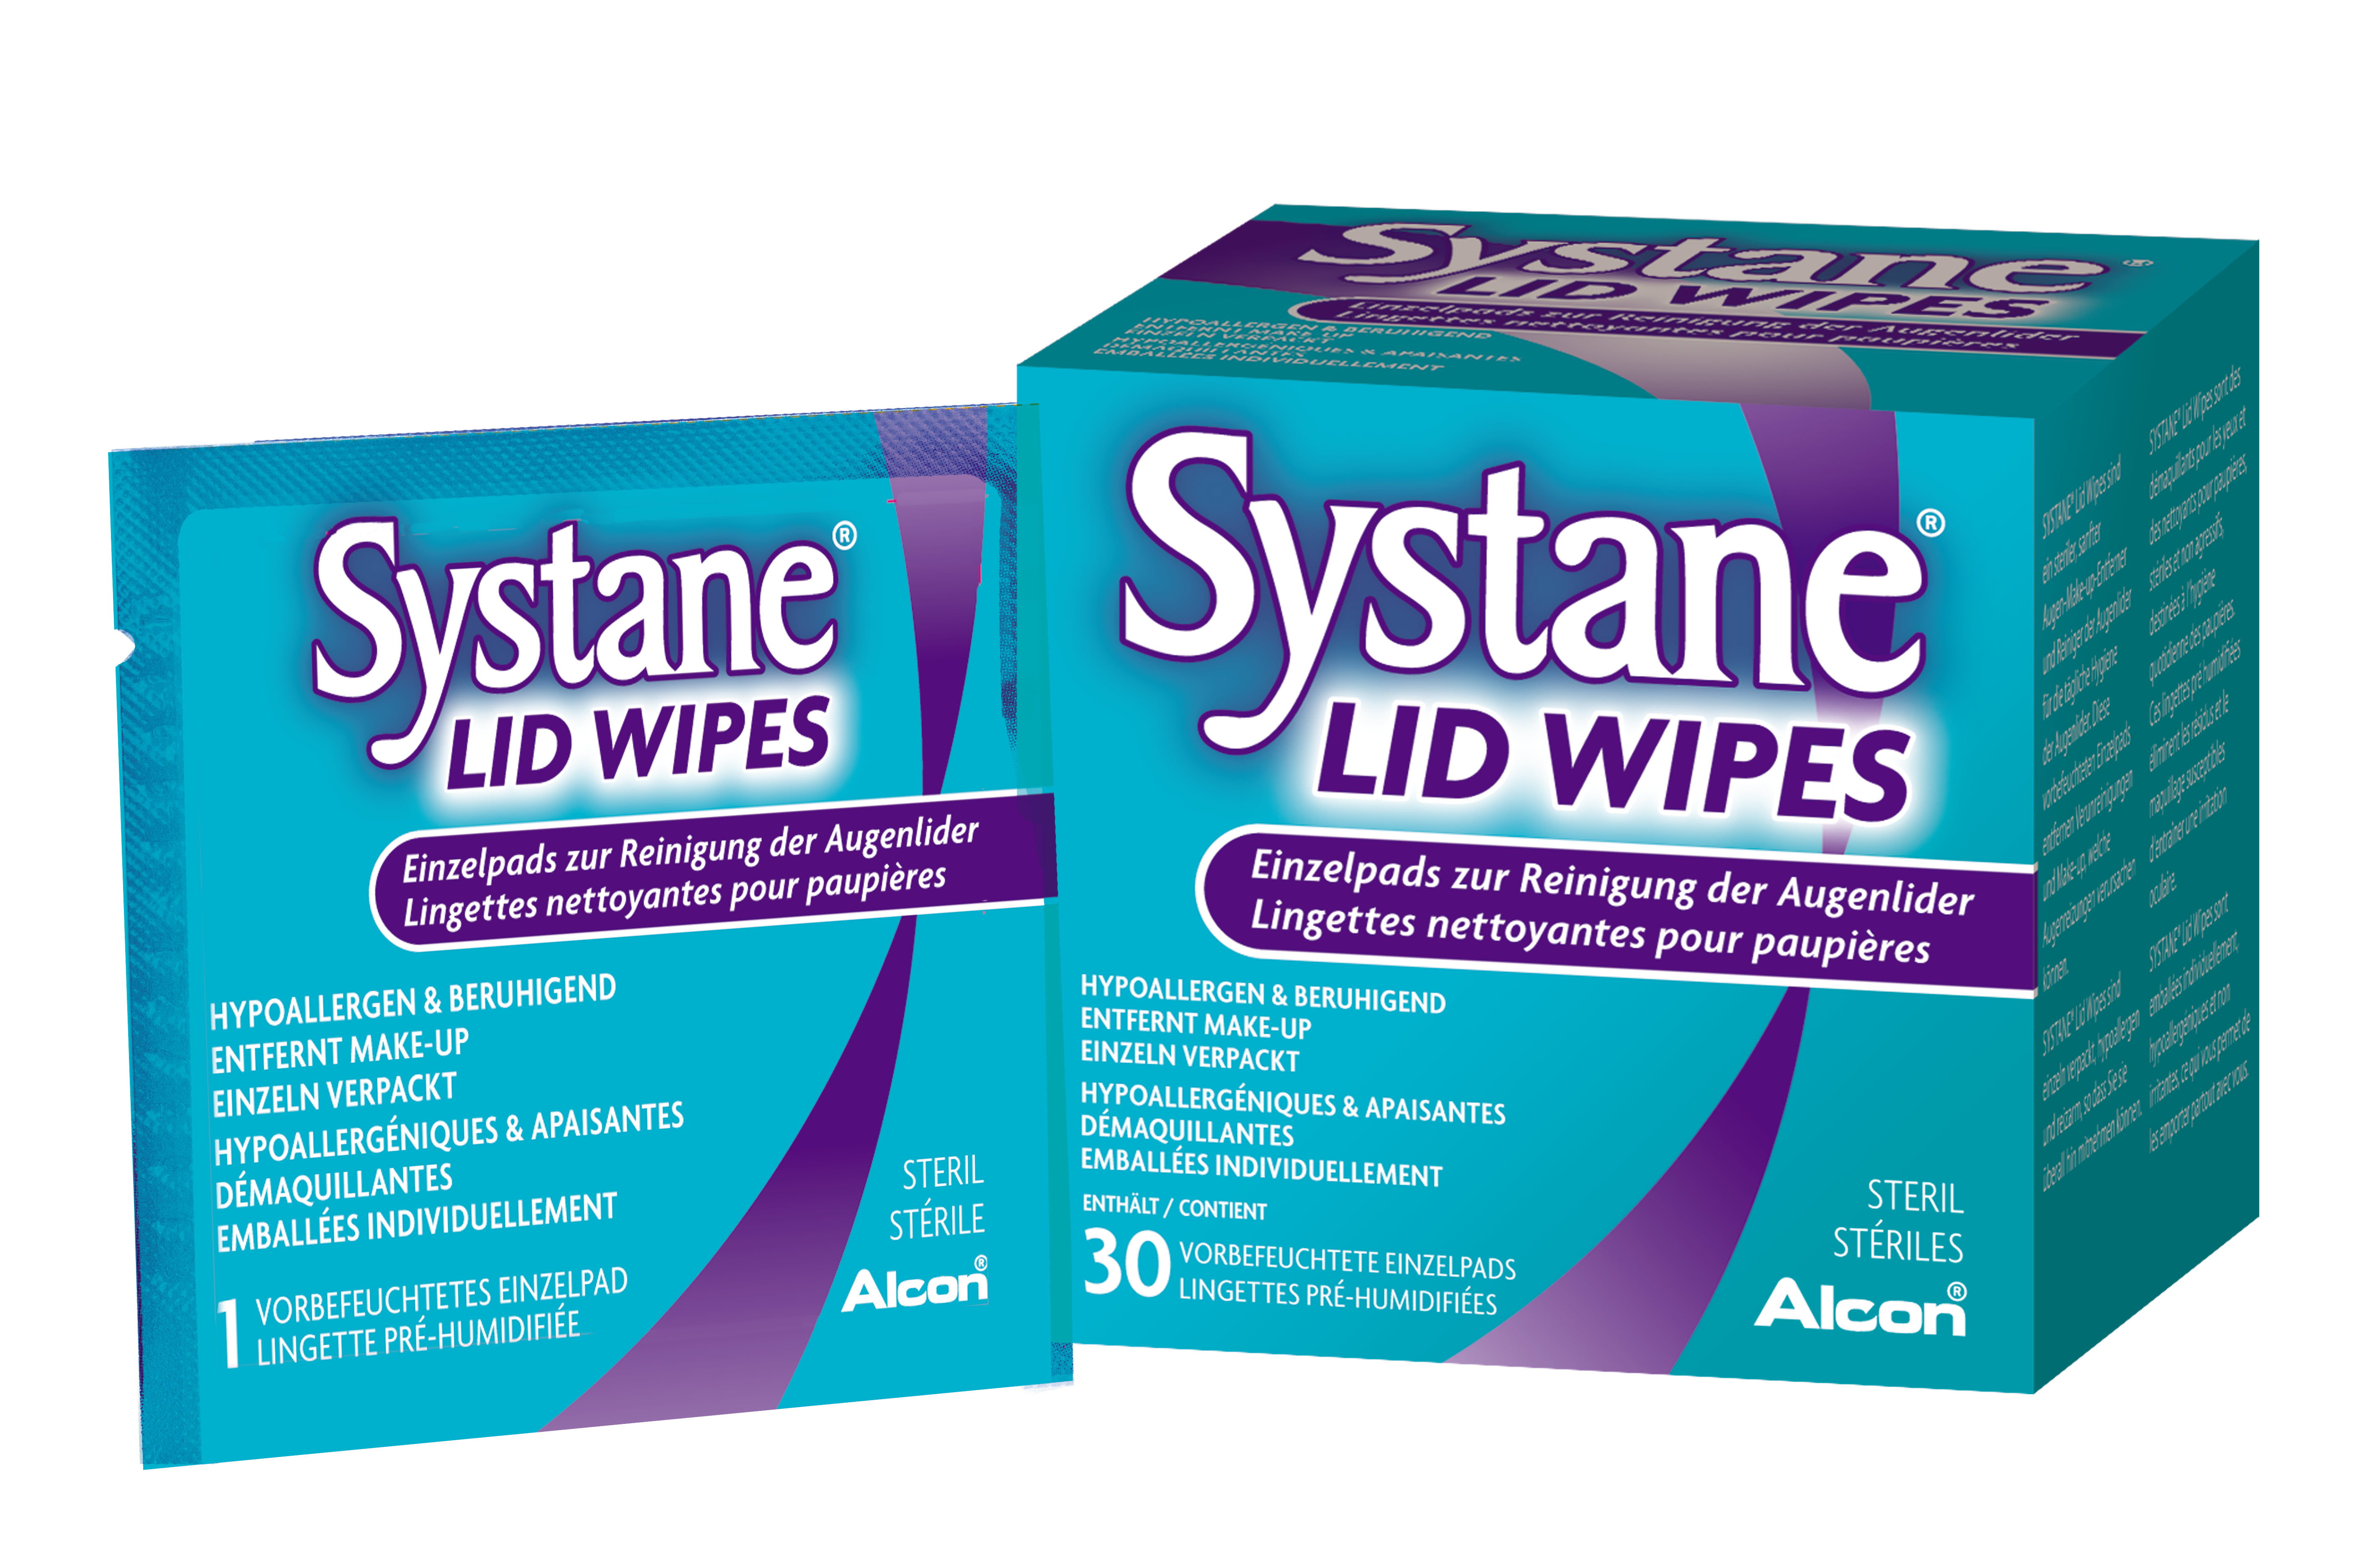 Systane lid wipes pack